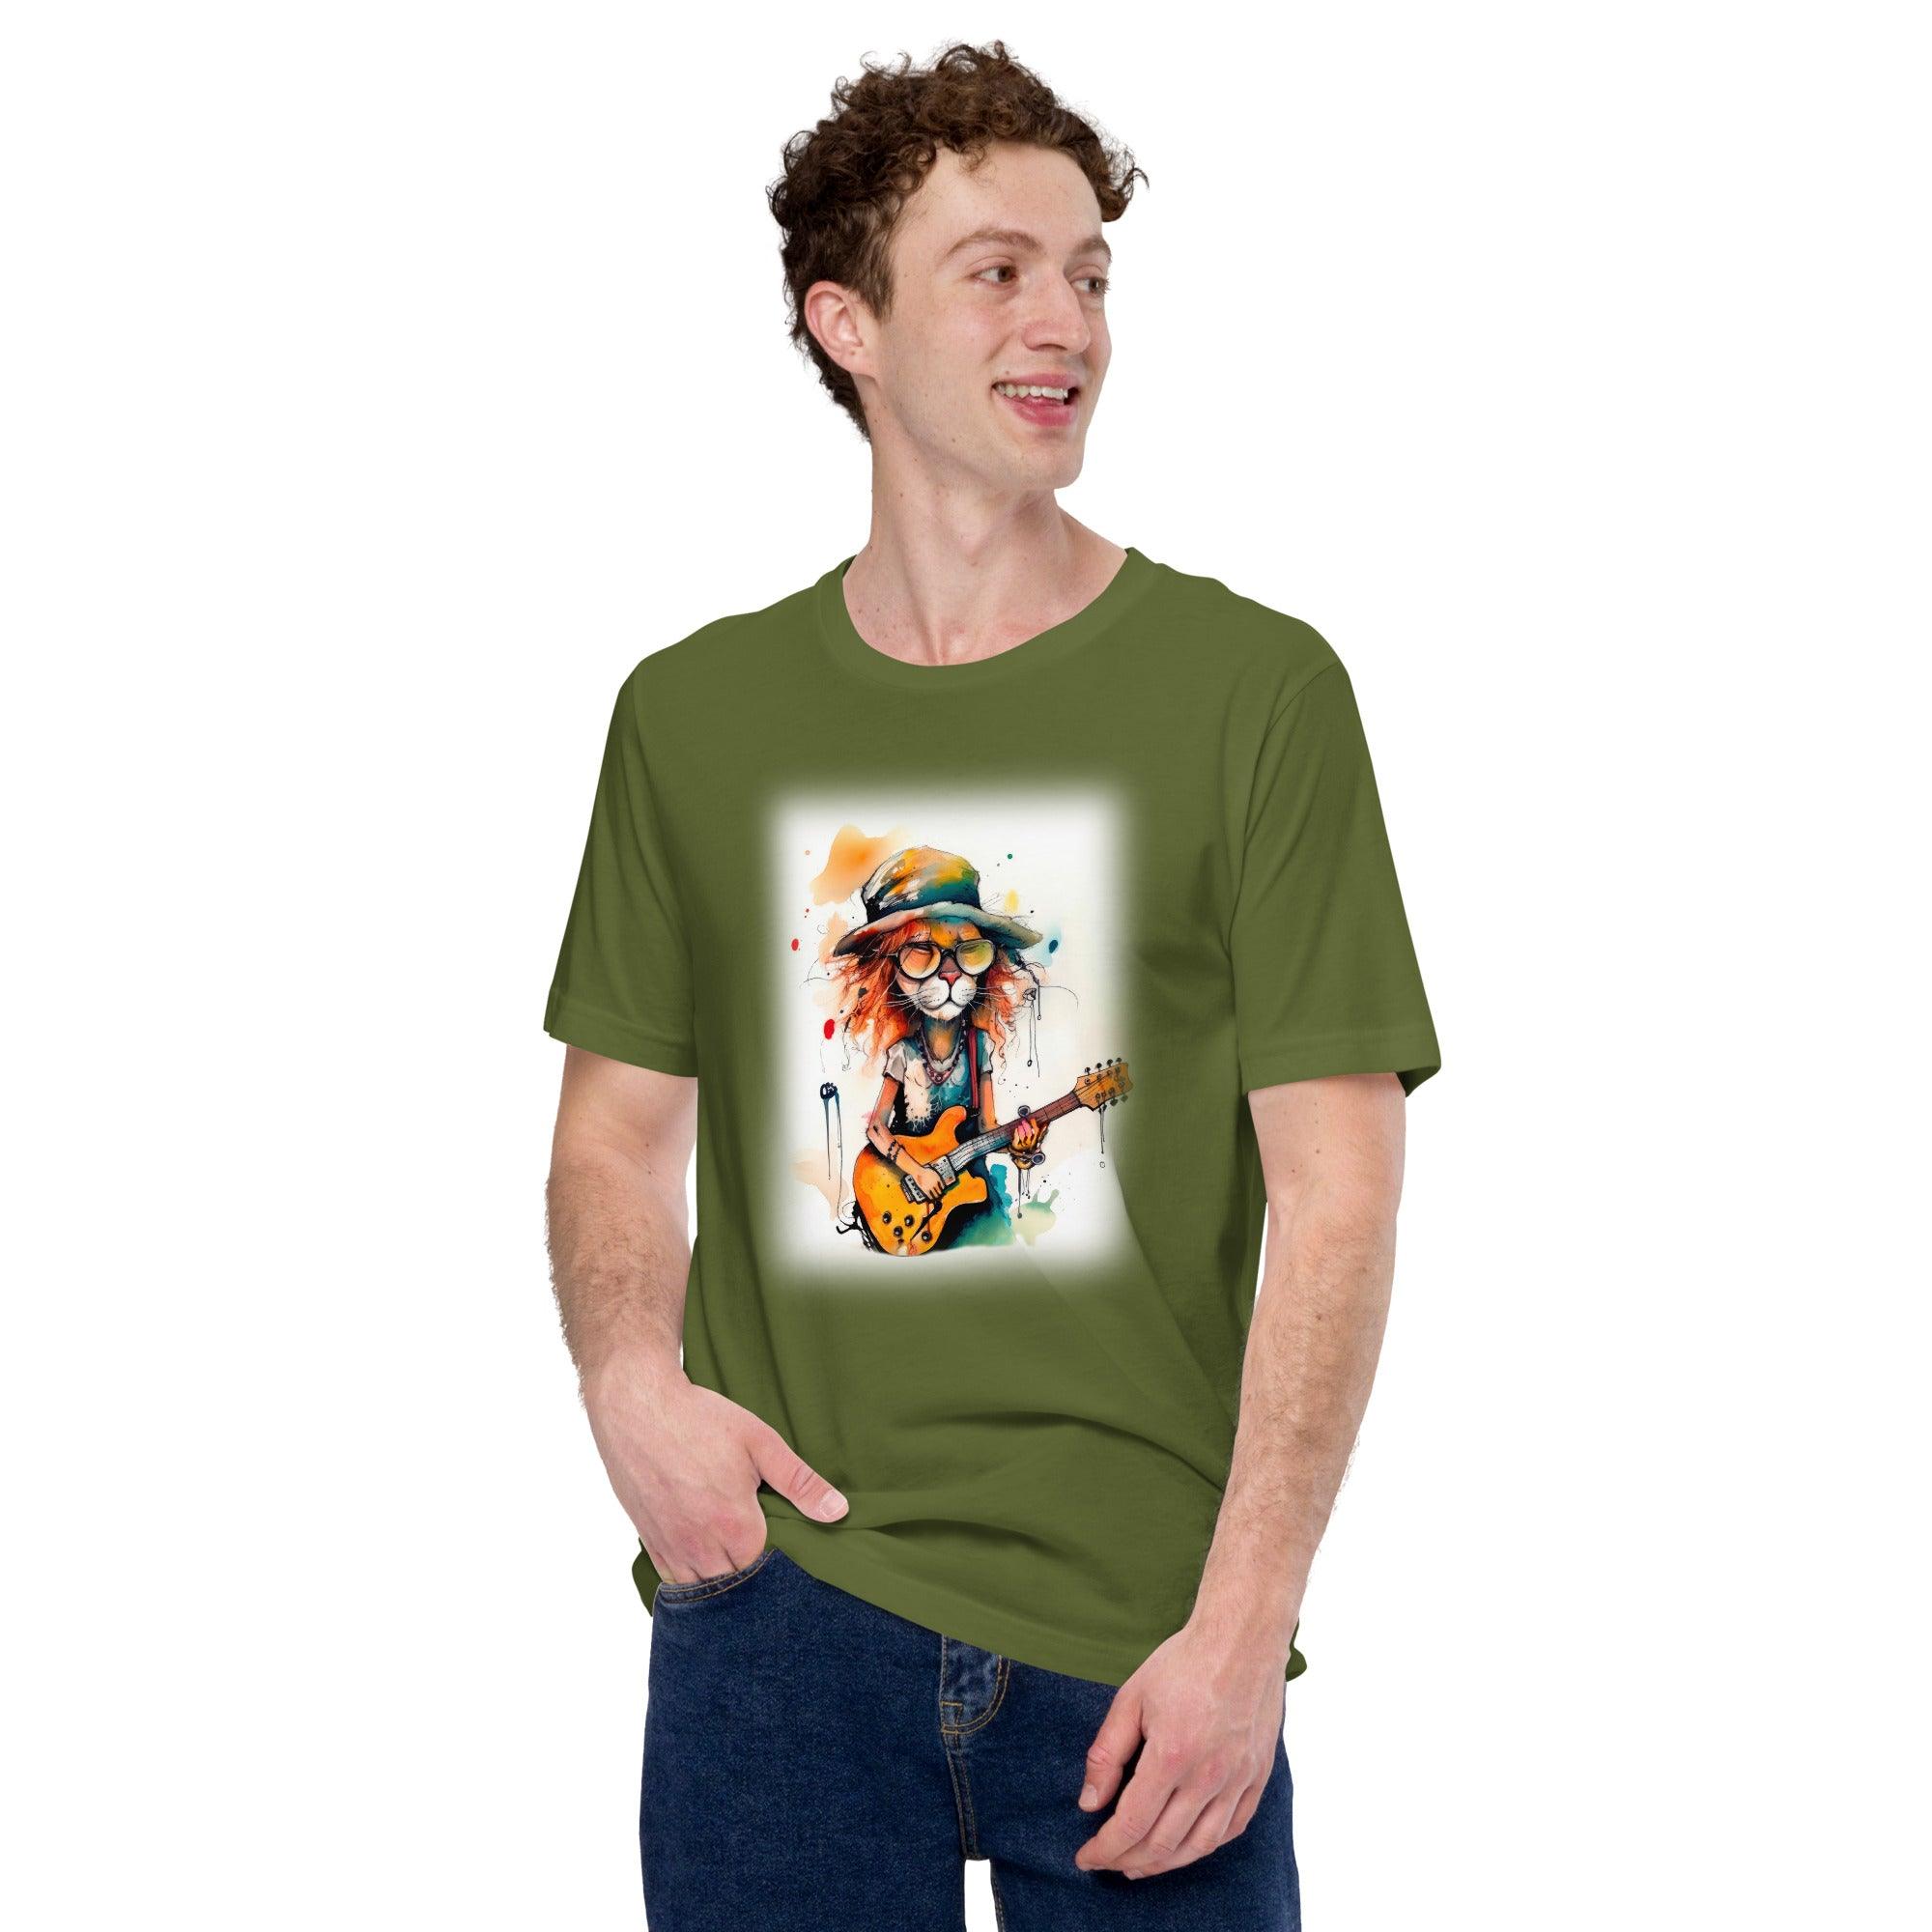 Sketchy Silhouettes Unisex Caricature Tee - Beyond T-shirts